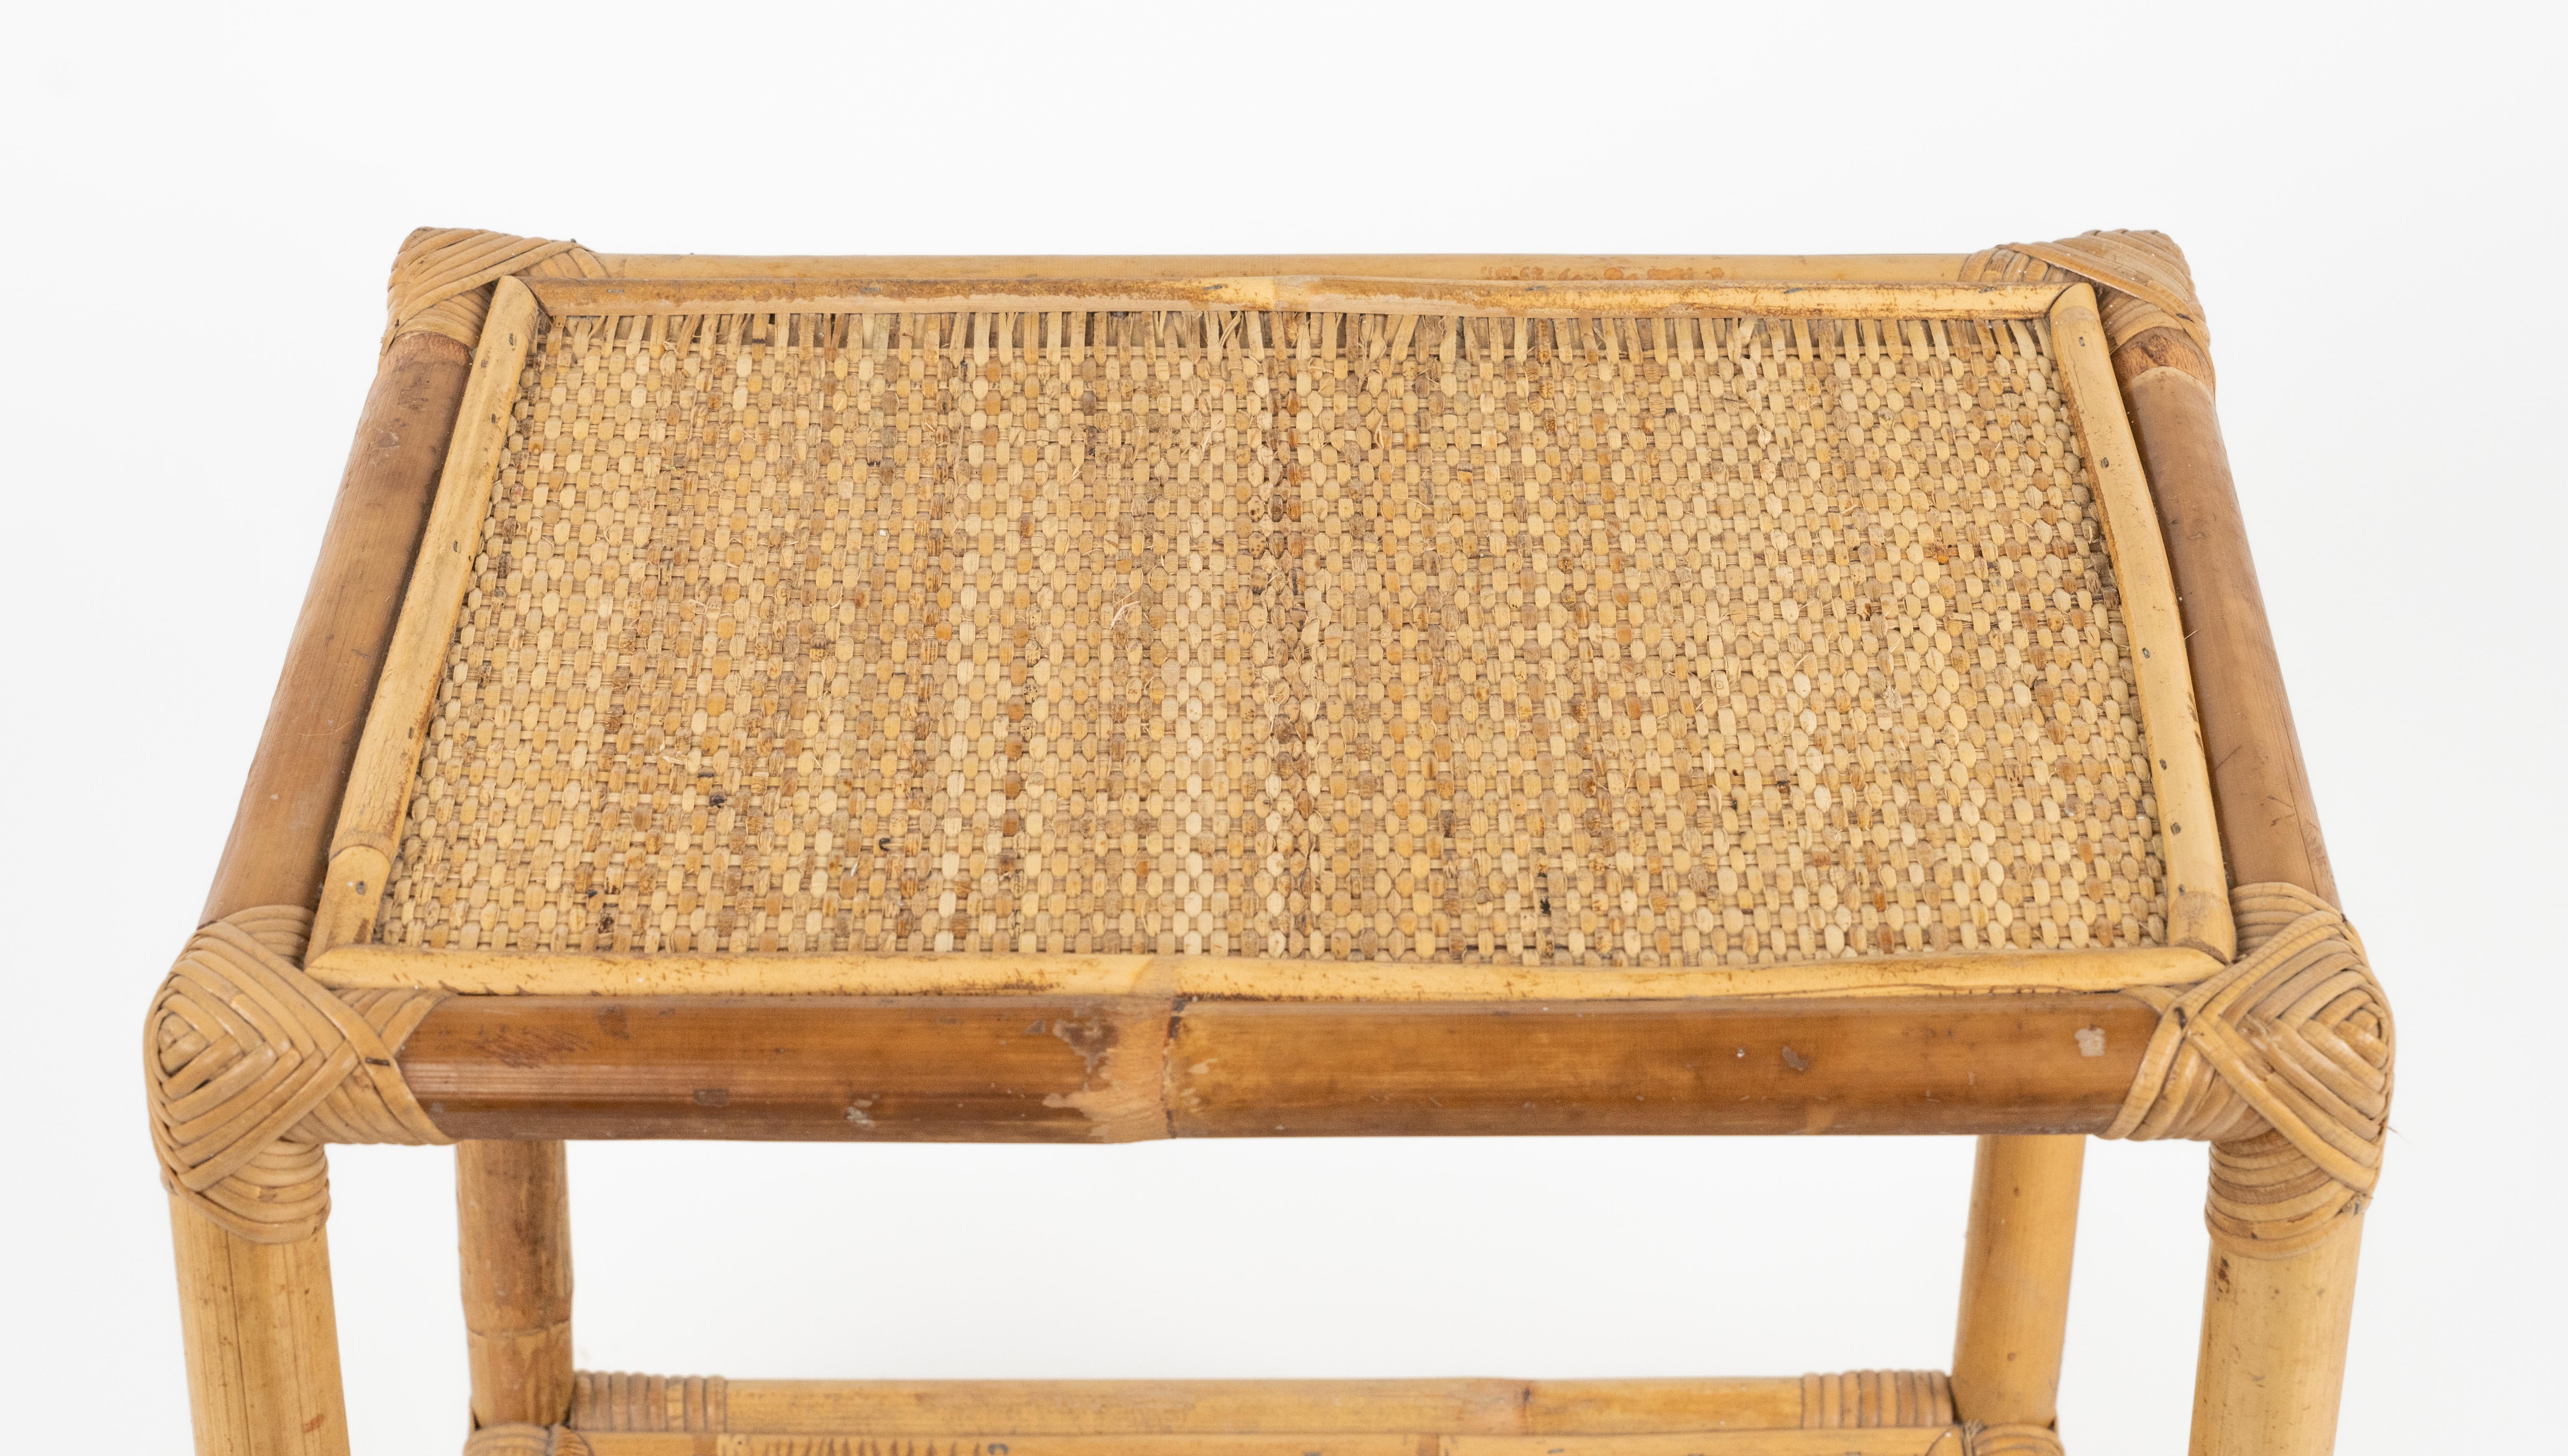 Midcentury Pair of Bed Side Tables in Bamboo, Rattan & Wicker, Italy 1970s For Sale 6